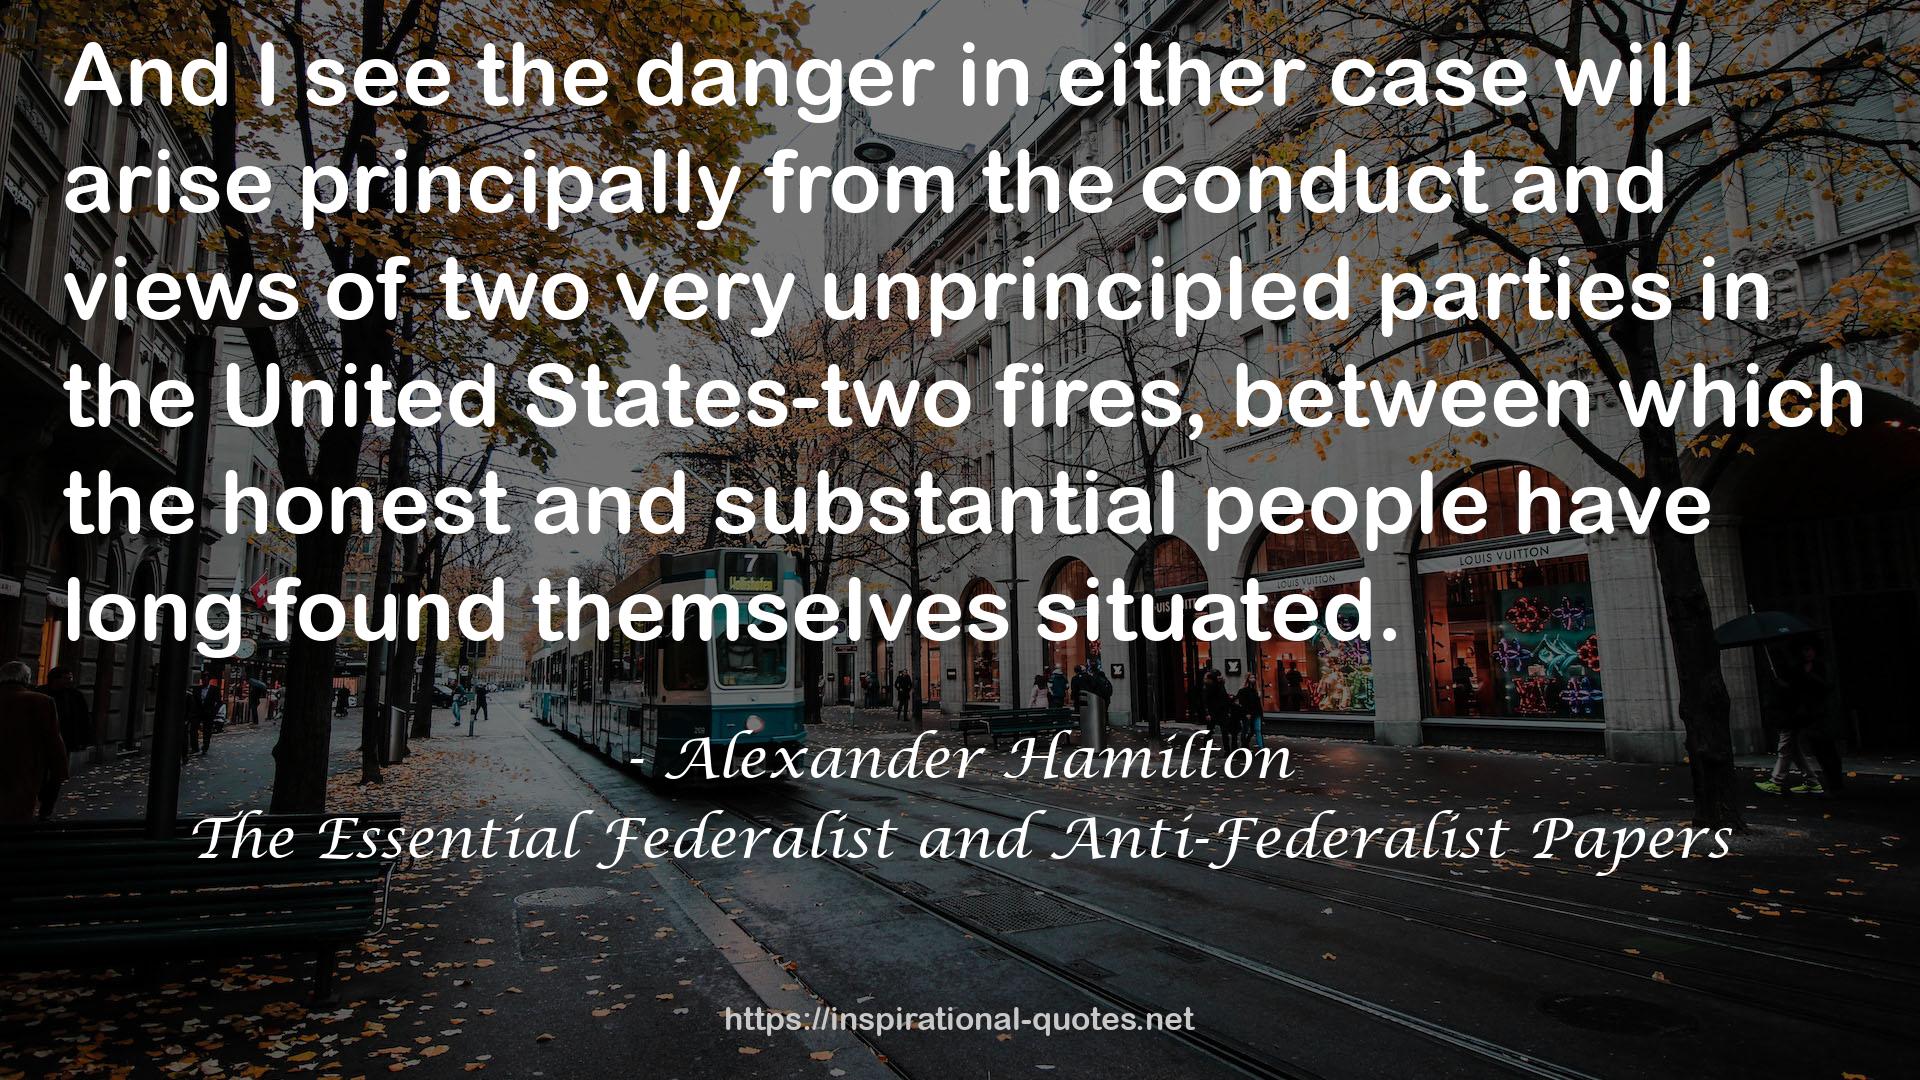 The Essential Federalist and Anti-Federalist Papers QUOTES